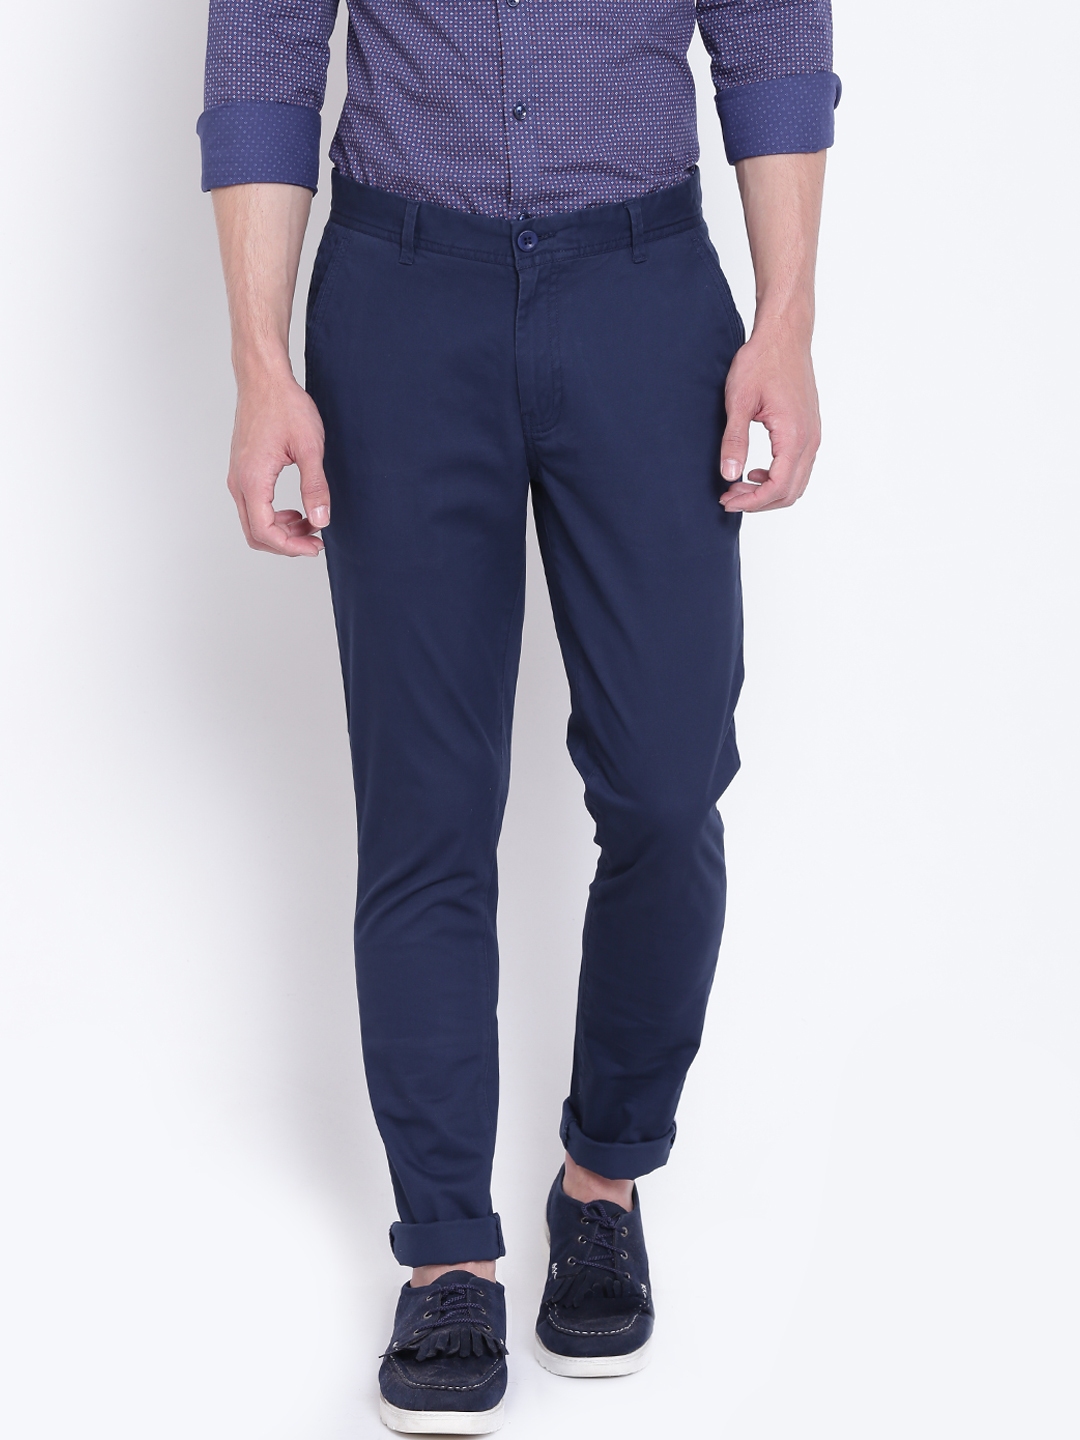 Buy United Colors Of Benetton Men Navy Blue Slim Fit Solid Chinos ...